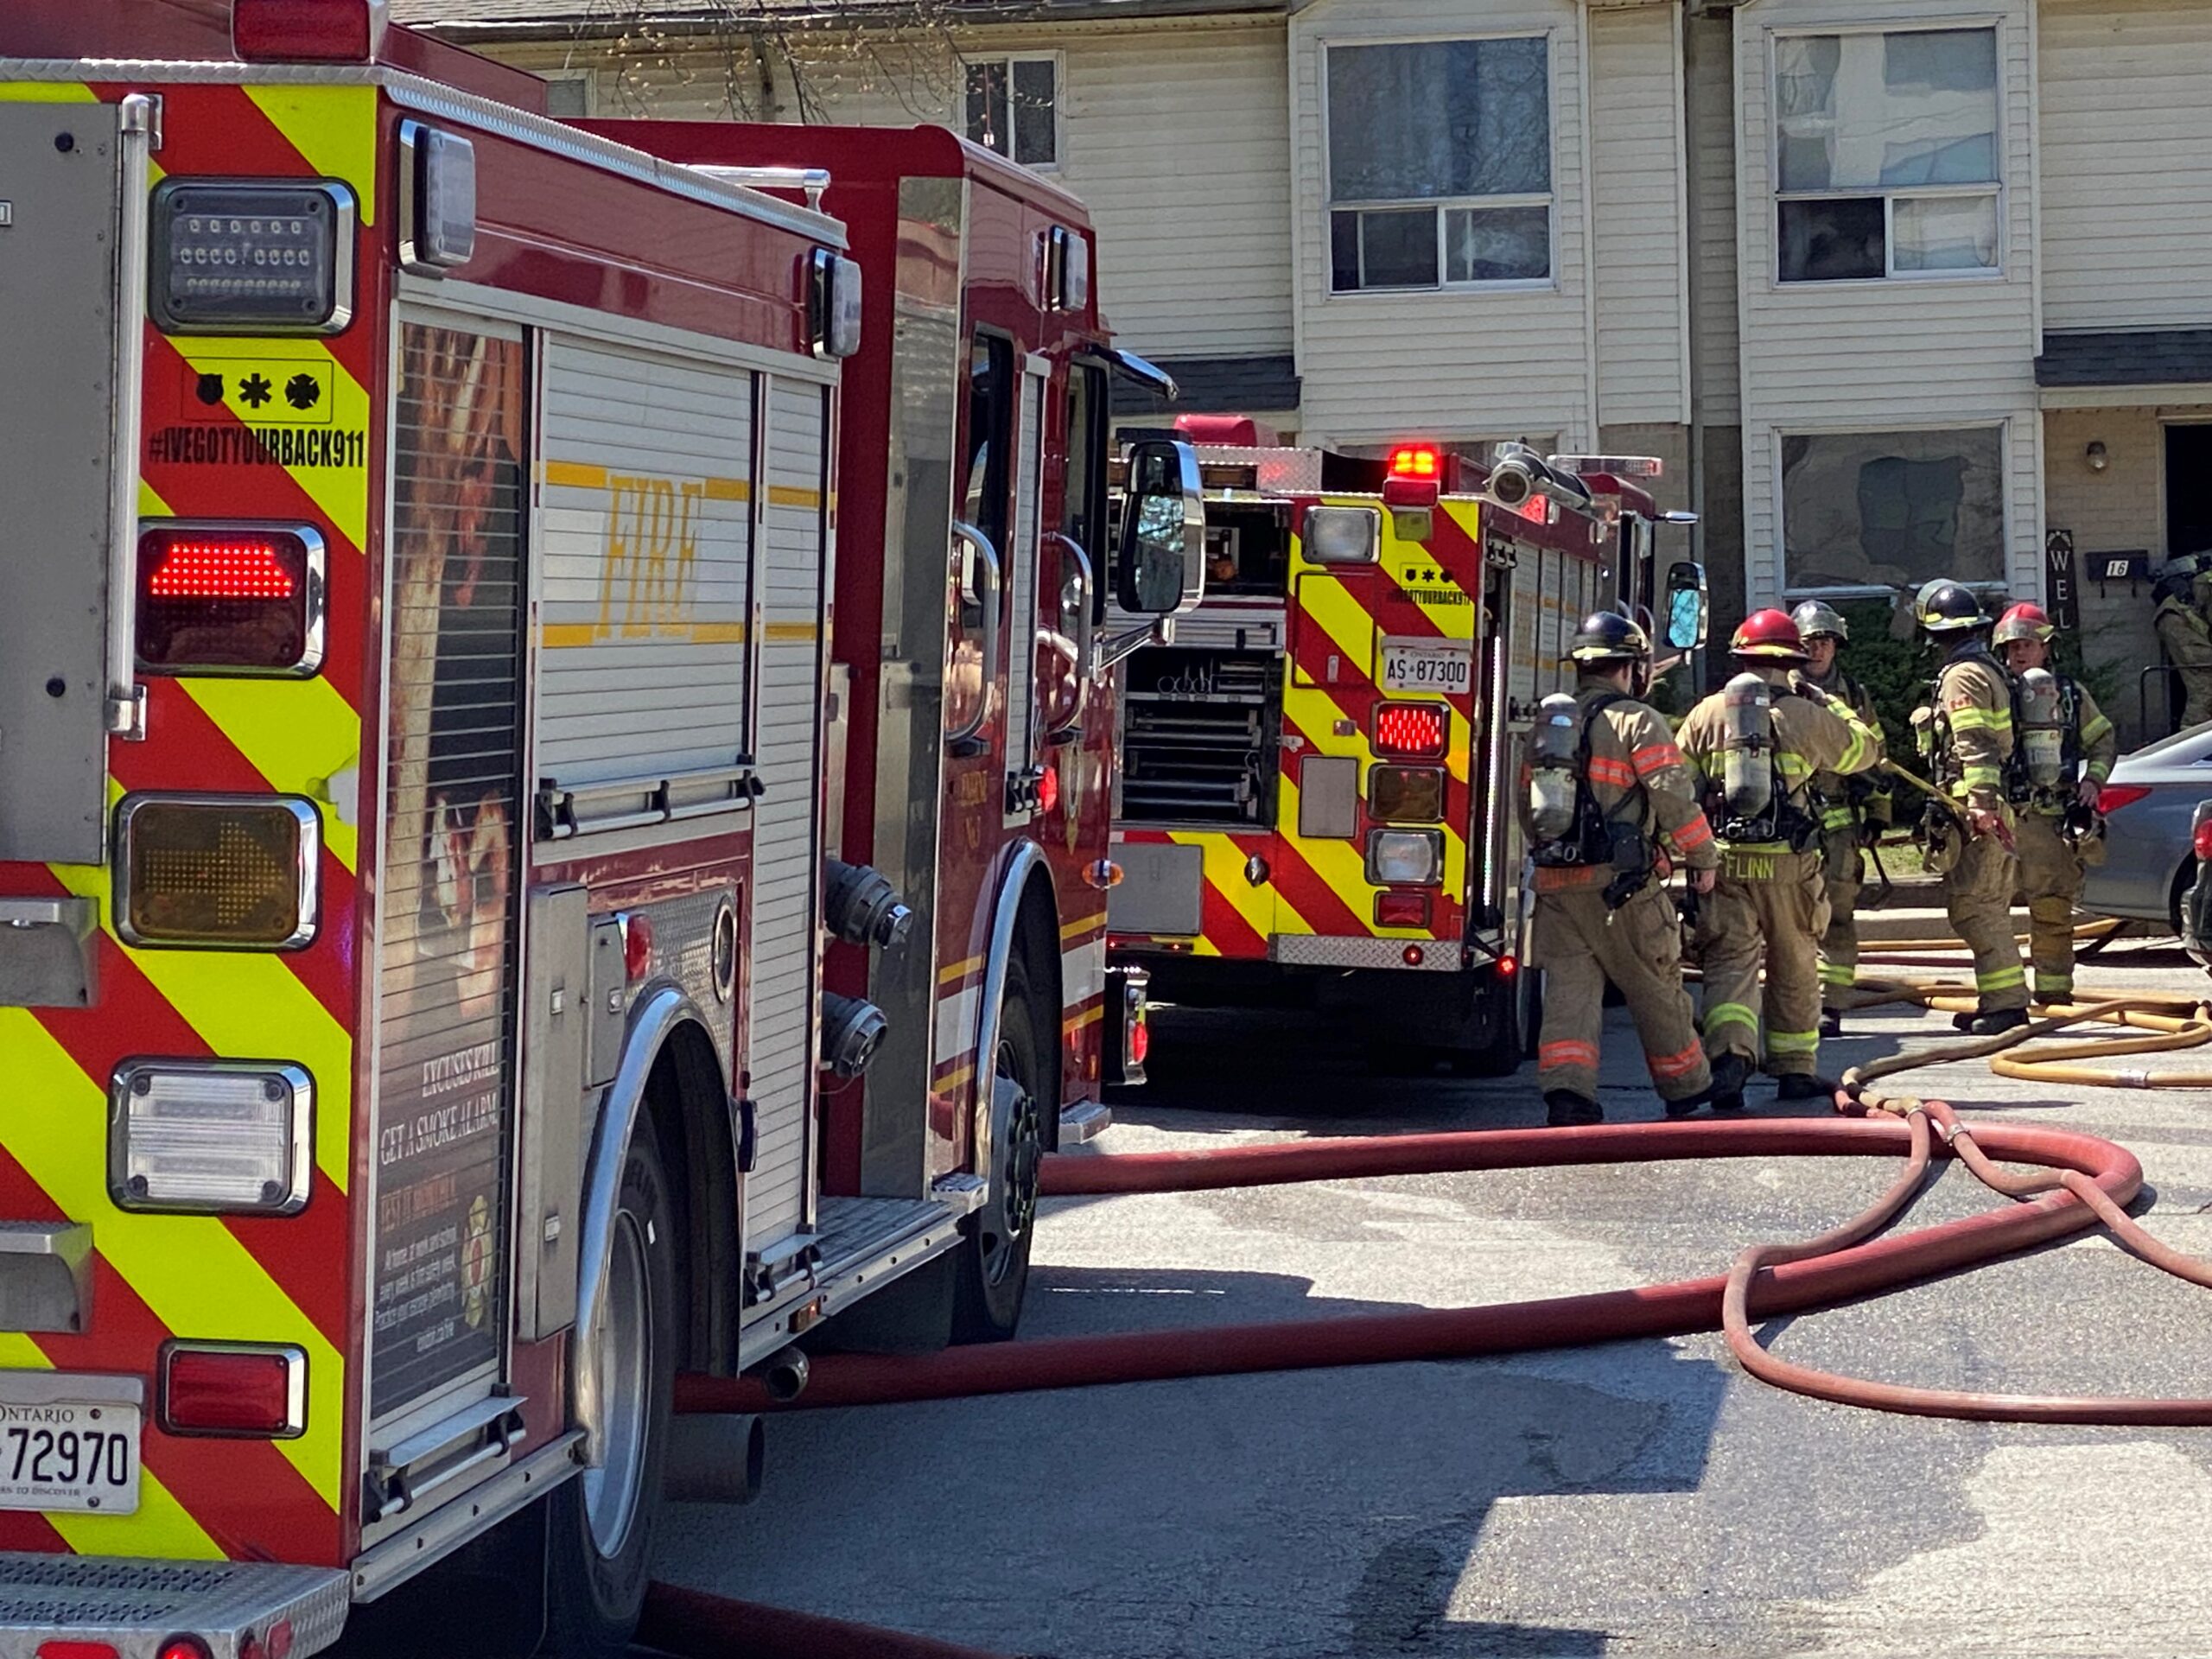 Fire trucks, personnel, and hoses in the parking lot area of a townhouse complex.